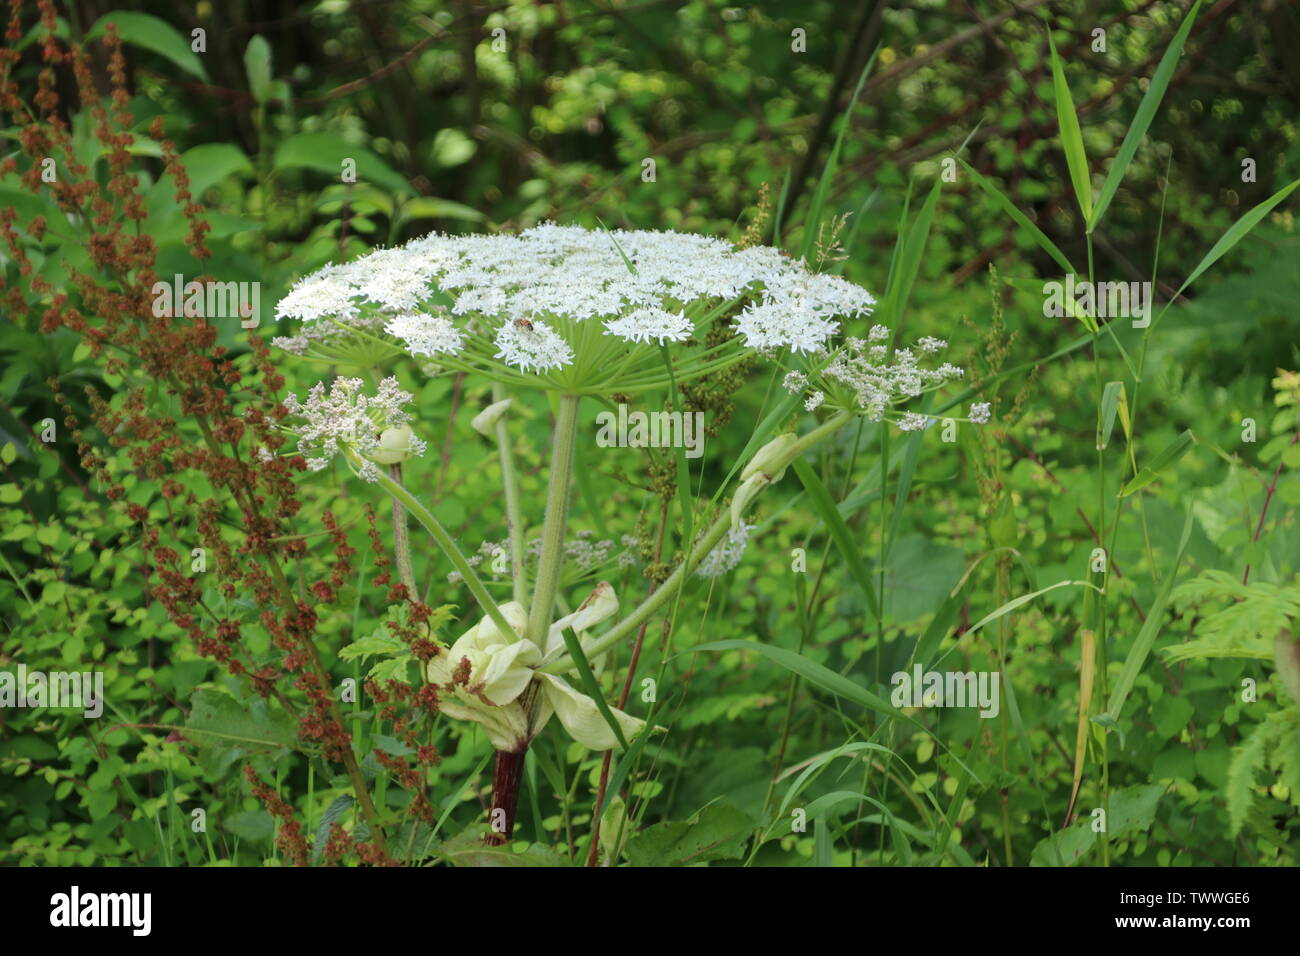 Hogweed flowers along the side of the road in Capelle aan den IJssel which can harm people and animals Stock Photo